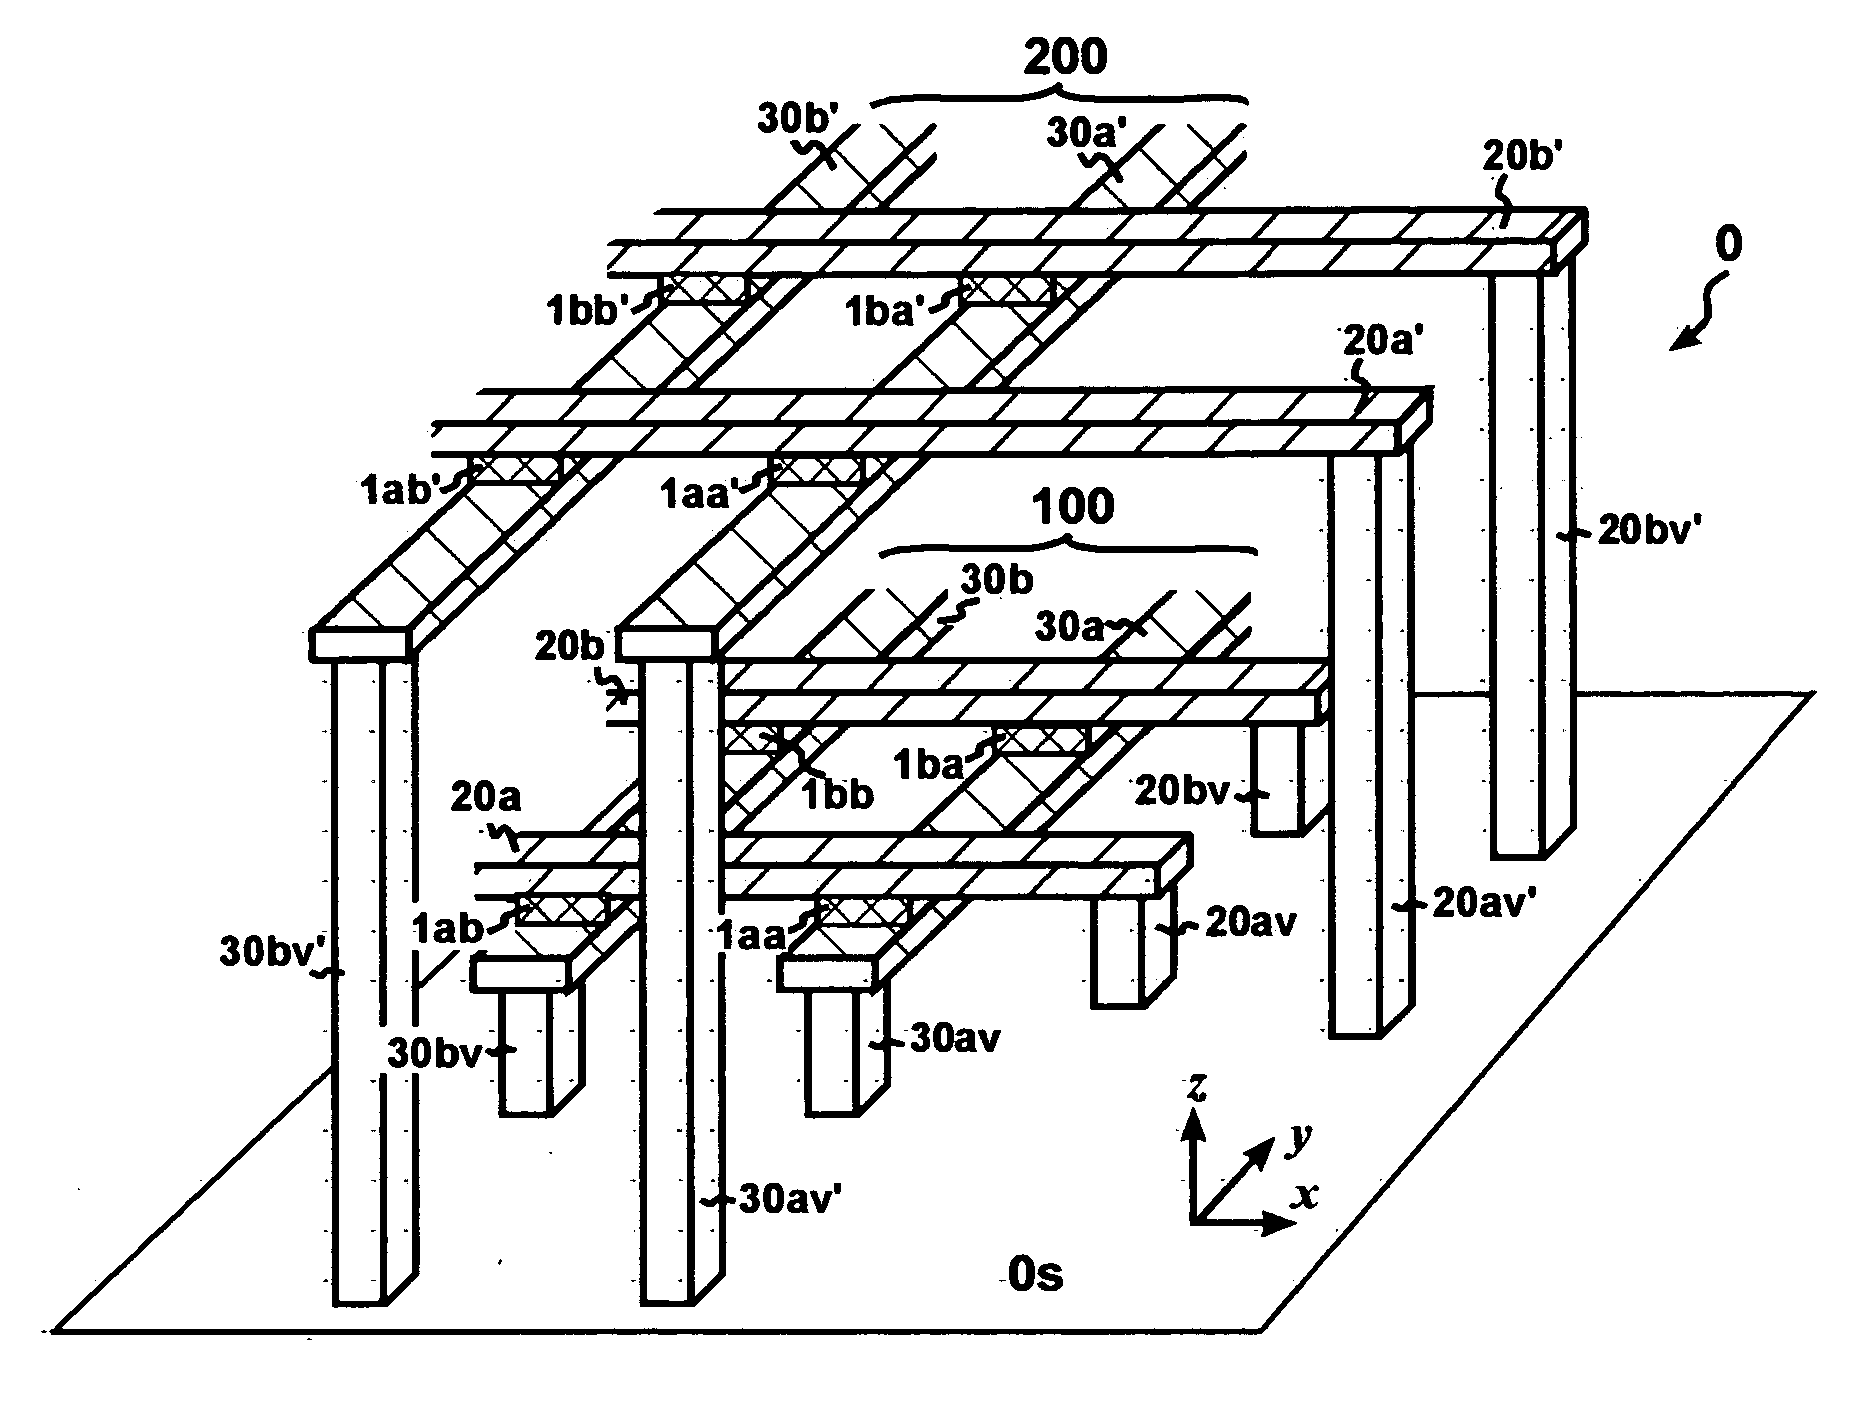 Self-testing printed circuit board comprising electrically programmable three-dimensional memory